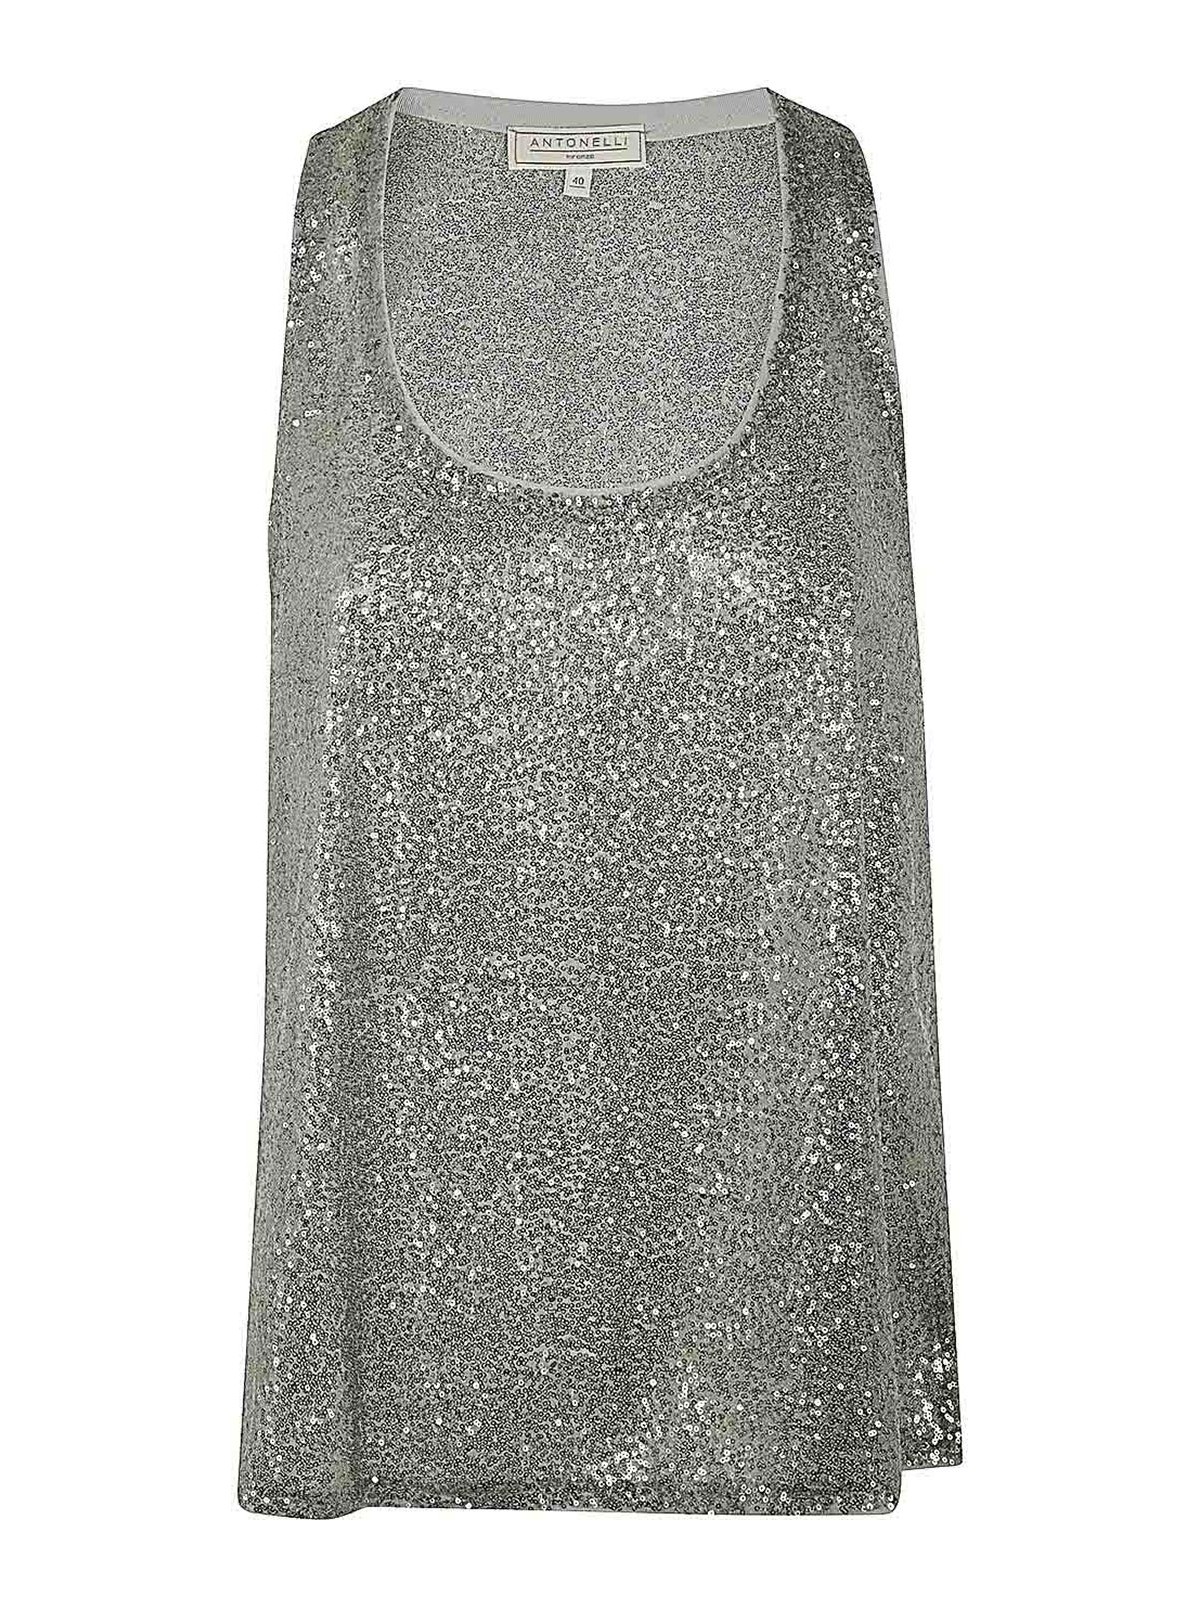 Antonelli Firenze Cecil Top With Paillettes In Silver